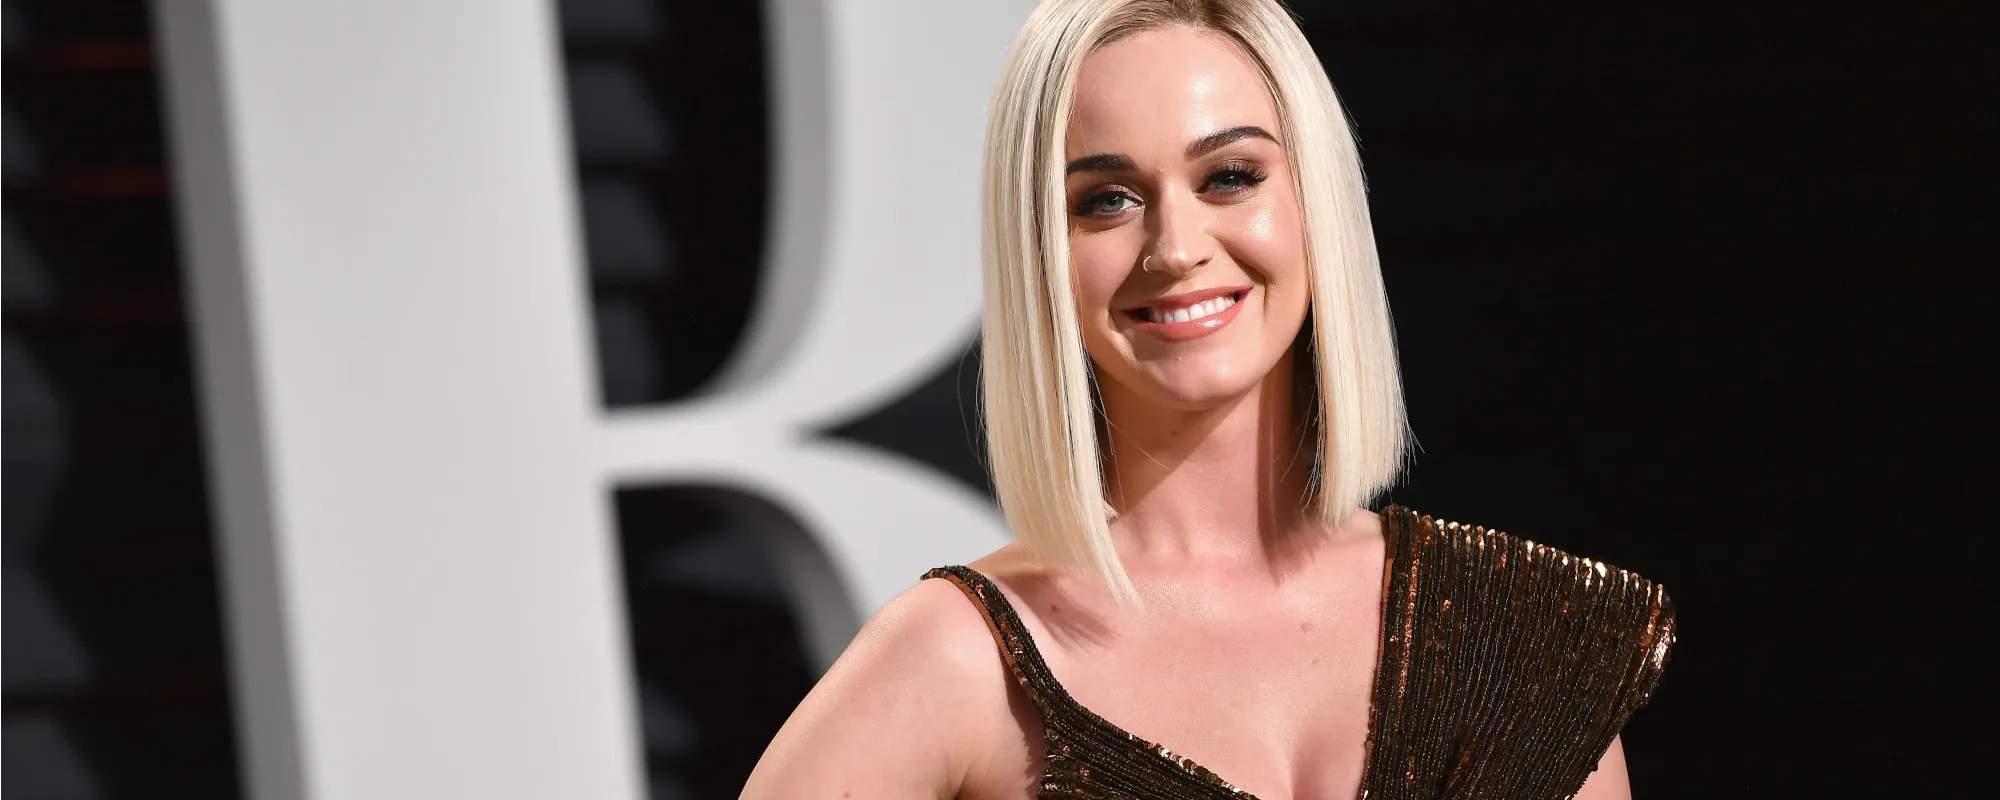 Katy Perry To Exit 'American Idol' After 7 Seasons